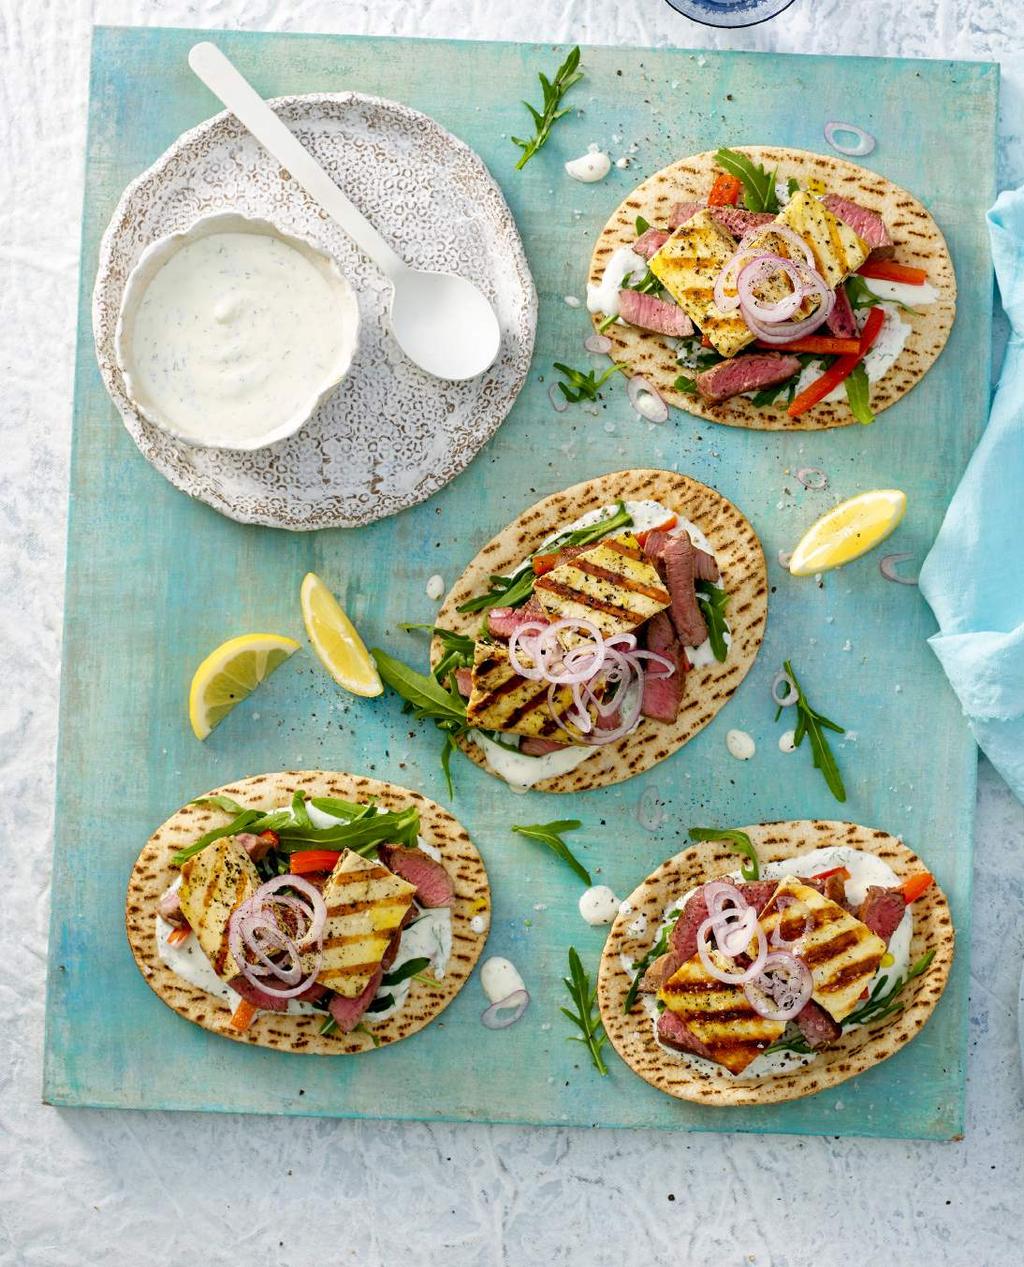 Grilled Lamb and Haloumi Pitas Mini flat breads, filled with grilled tender lean lamb strips and golden Lime & Pepper Haloumi, red capsicum and a simple dill, garlic, and yoghurt sauce.